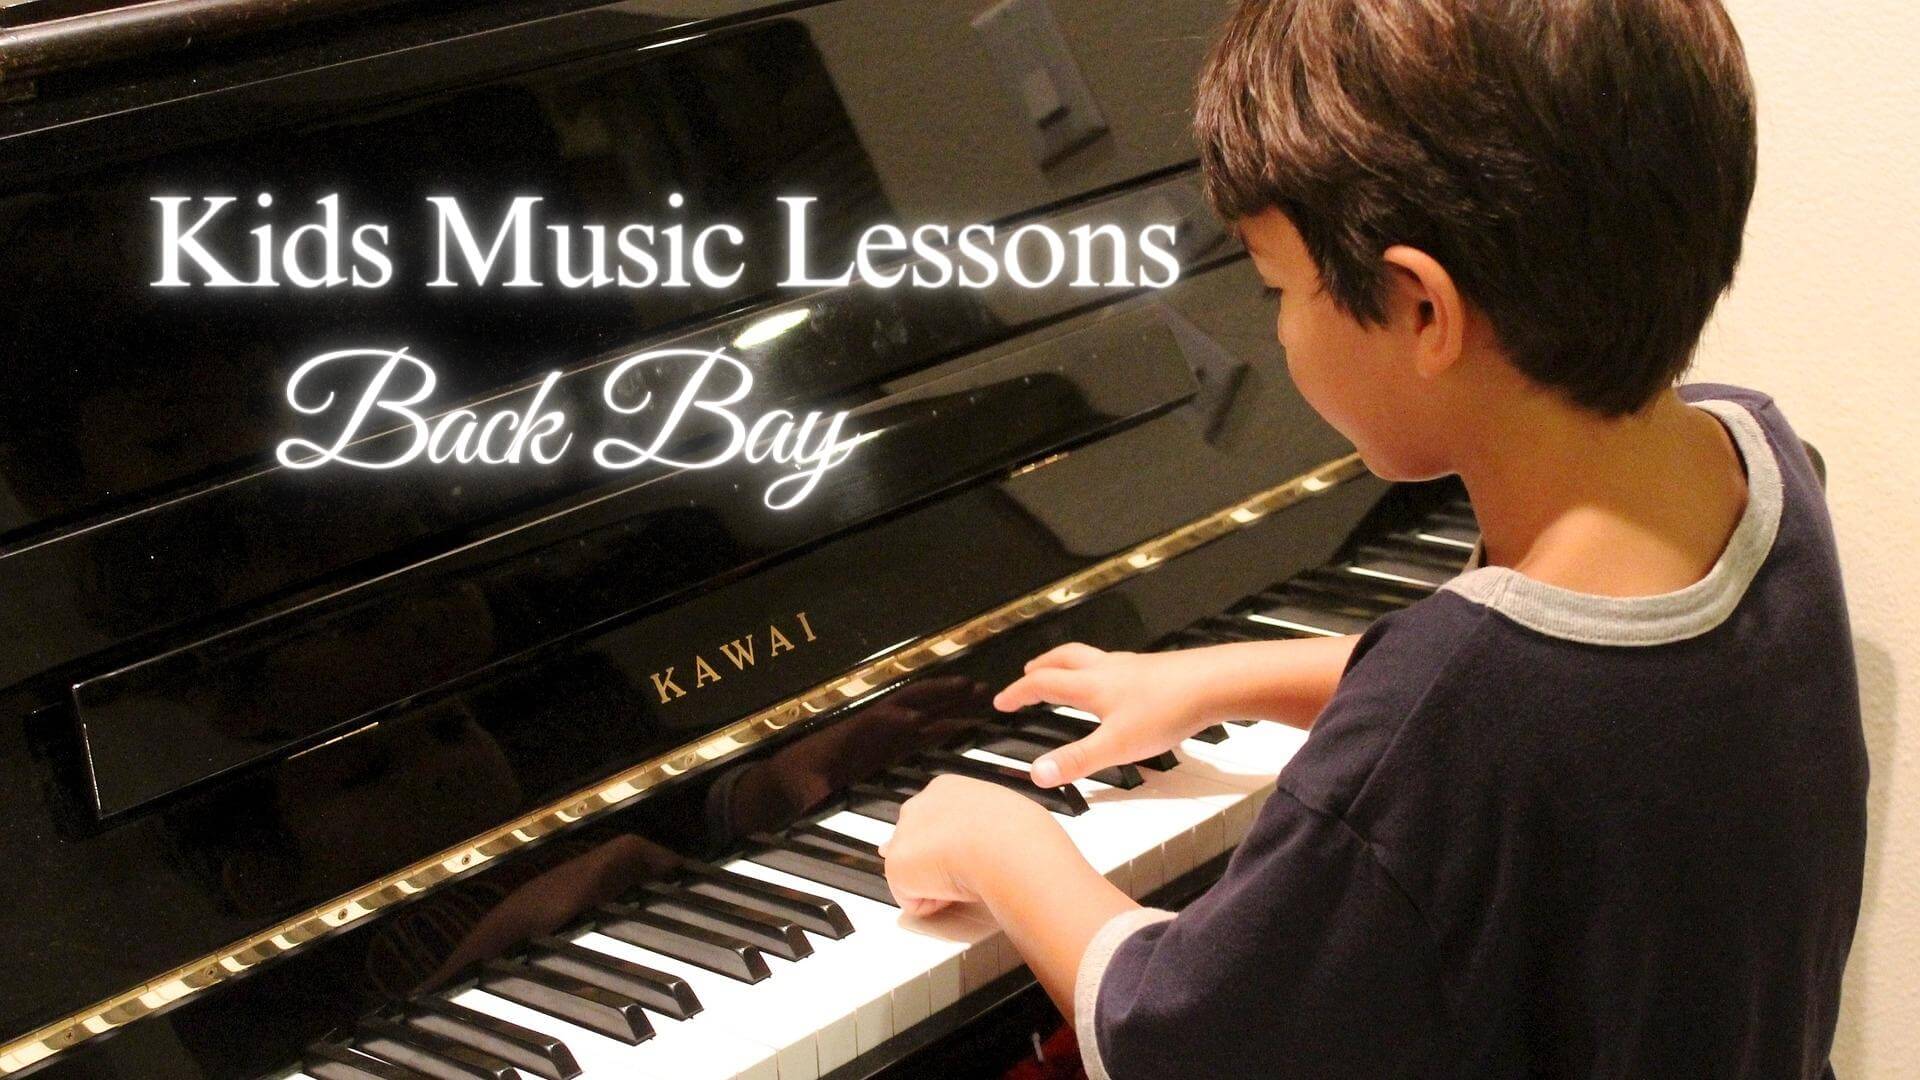 Child-Friendly Music Lessons in Back Bay, Massachusetts: Music Programs for Kids at Musicians Playground